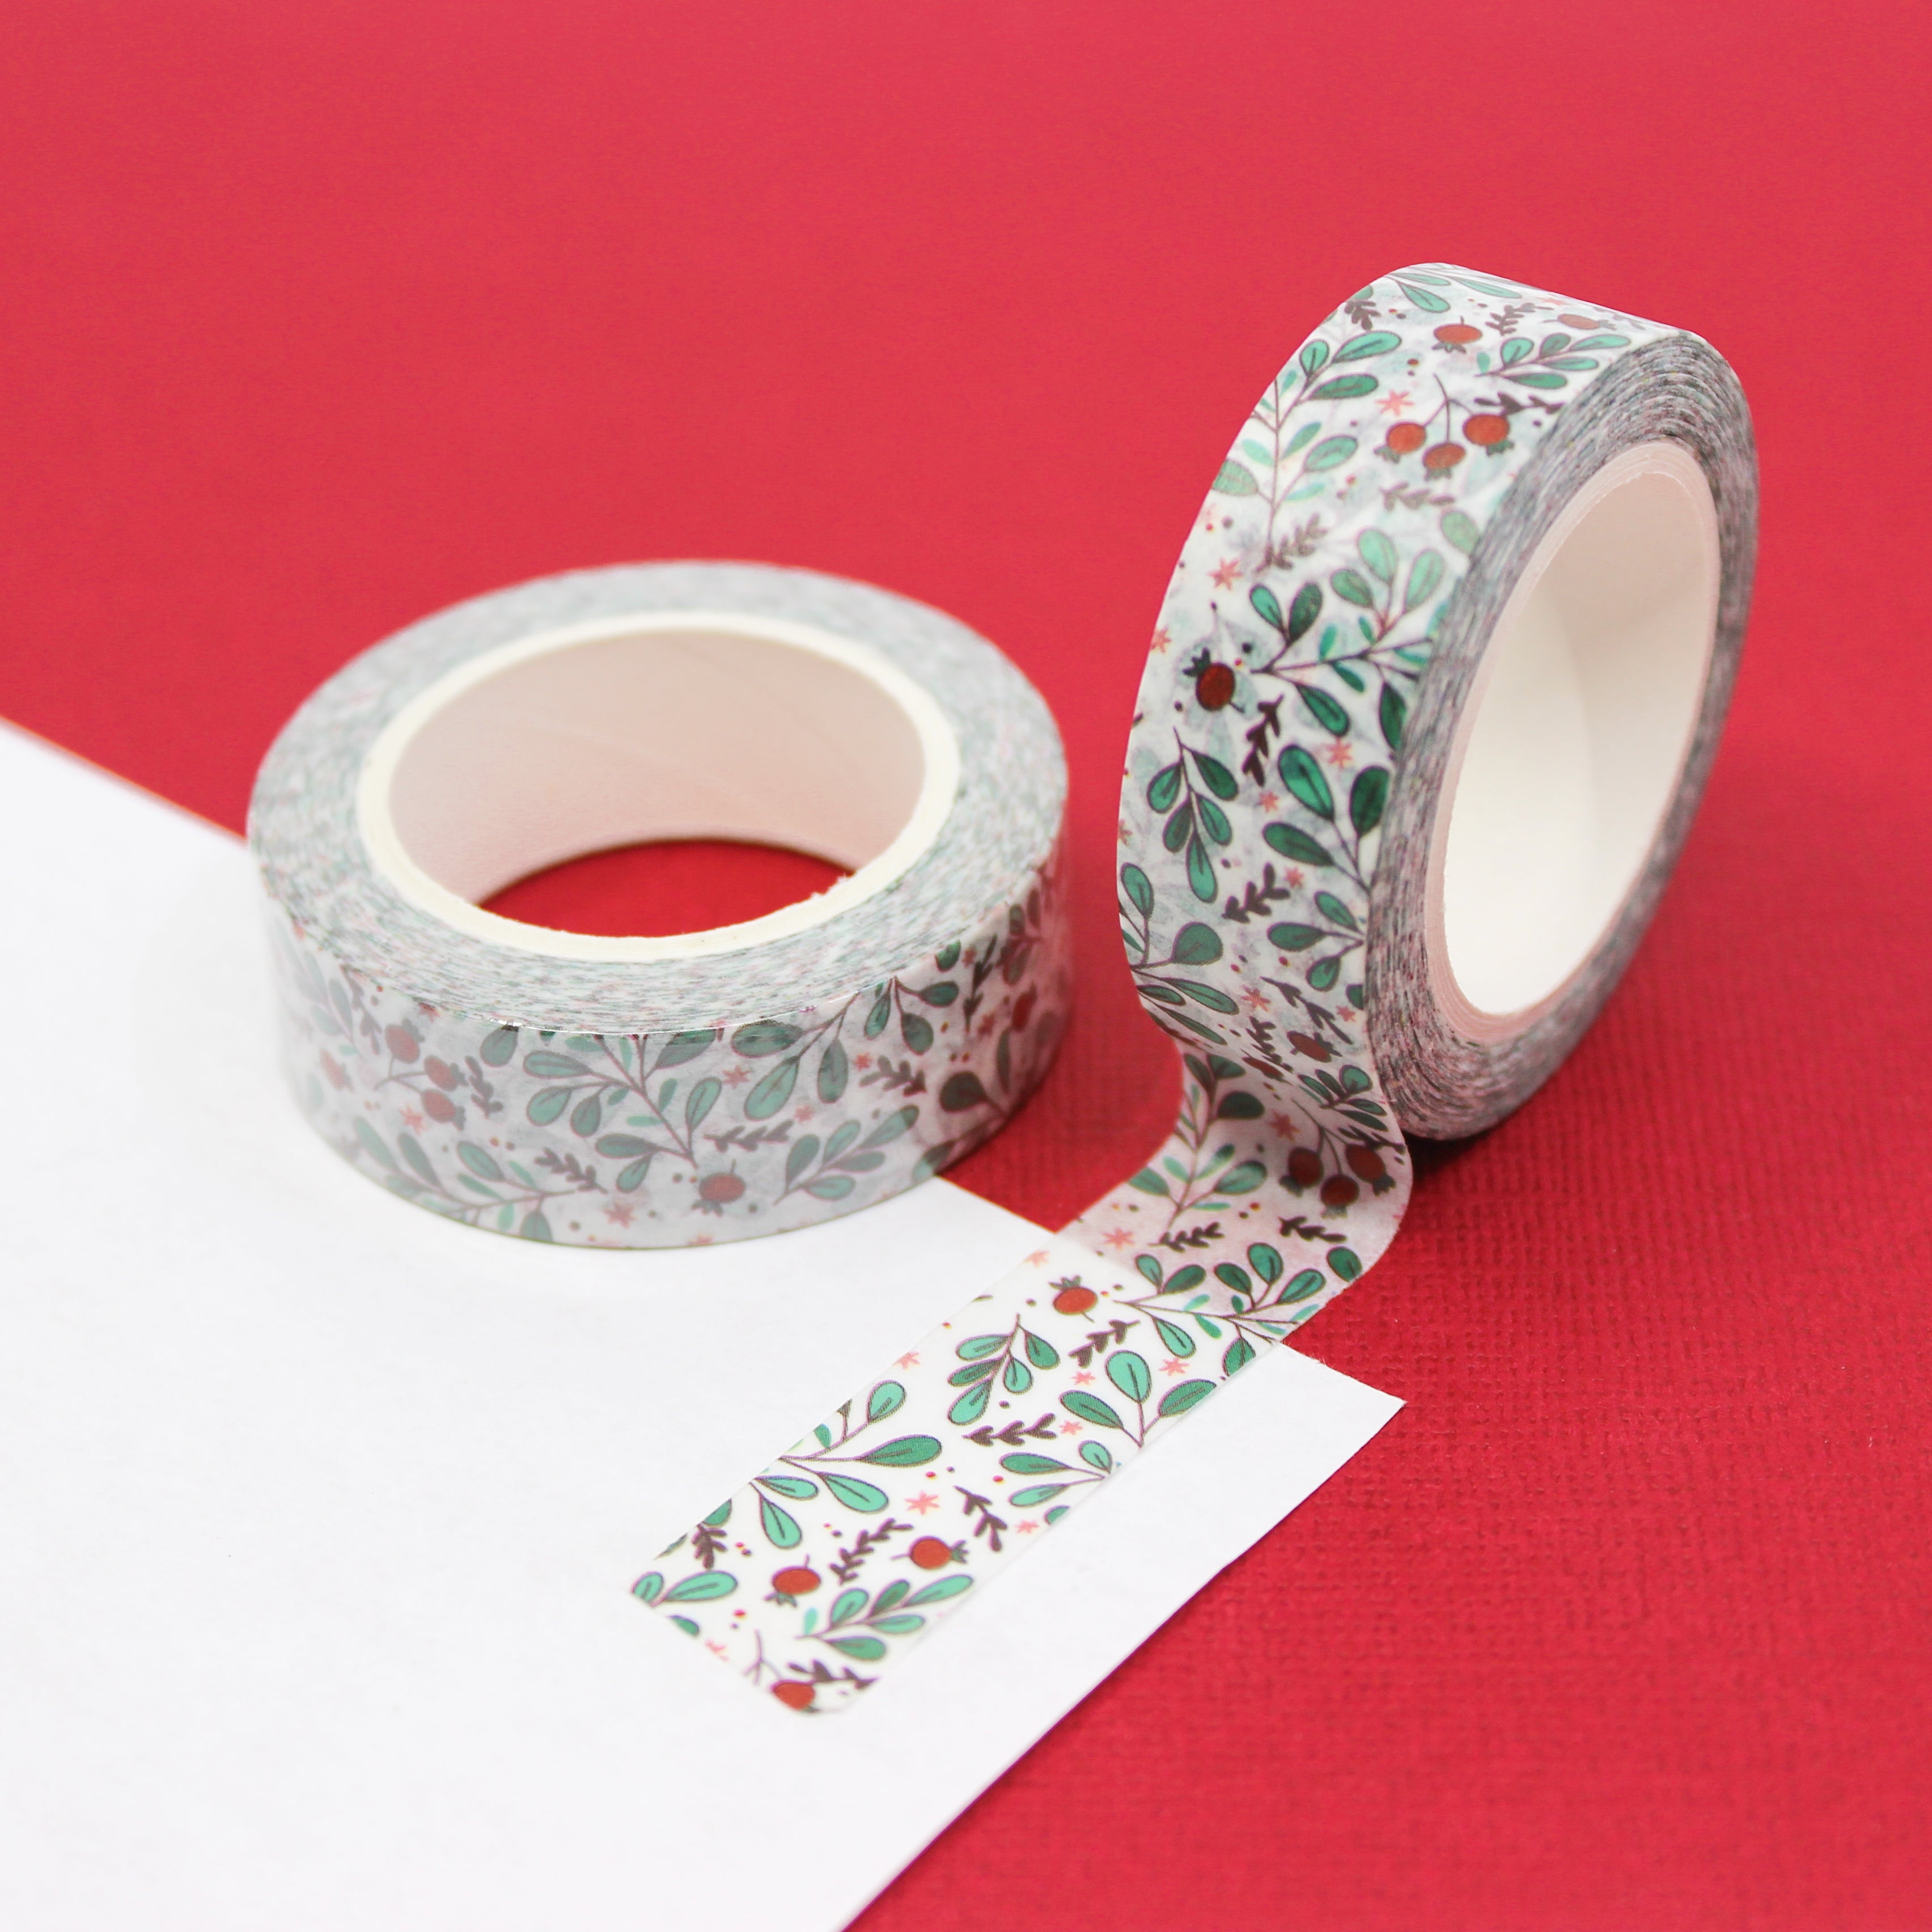 This is a holly branch and leaves view themed washi tape from BBB Supplies Craft Shop